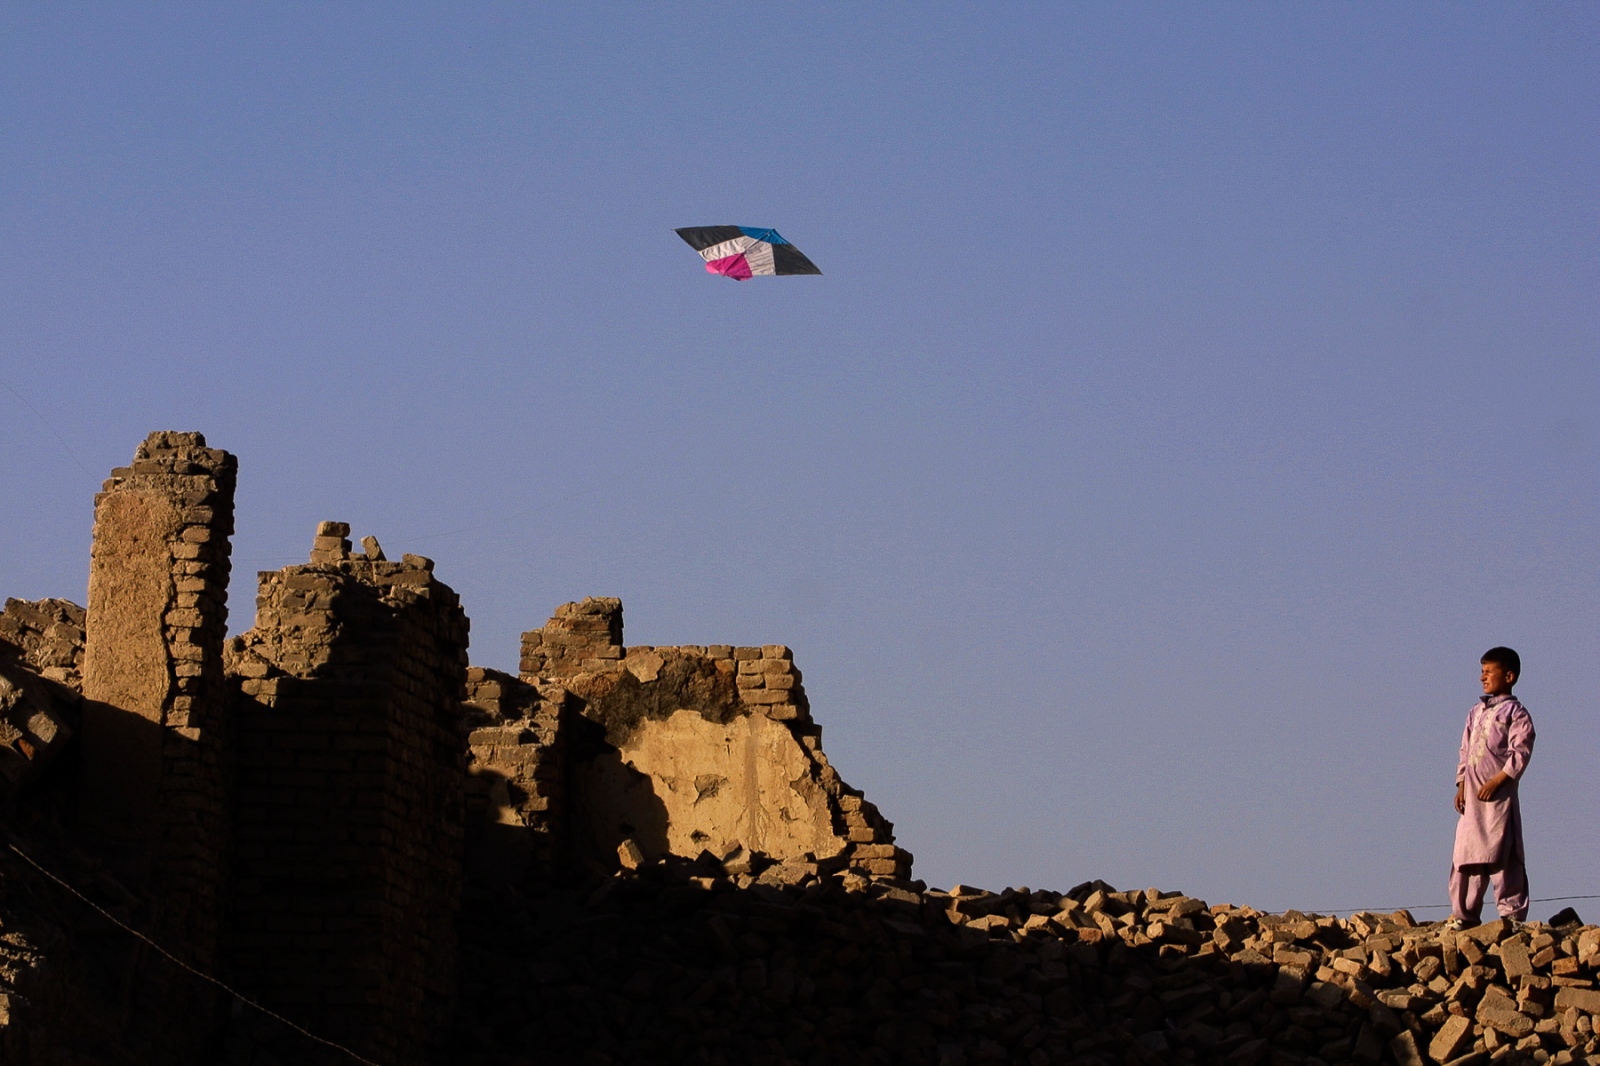 Onward to Kabul - A young boy looks skyward while flying his kite. At that...